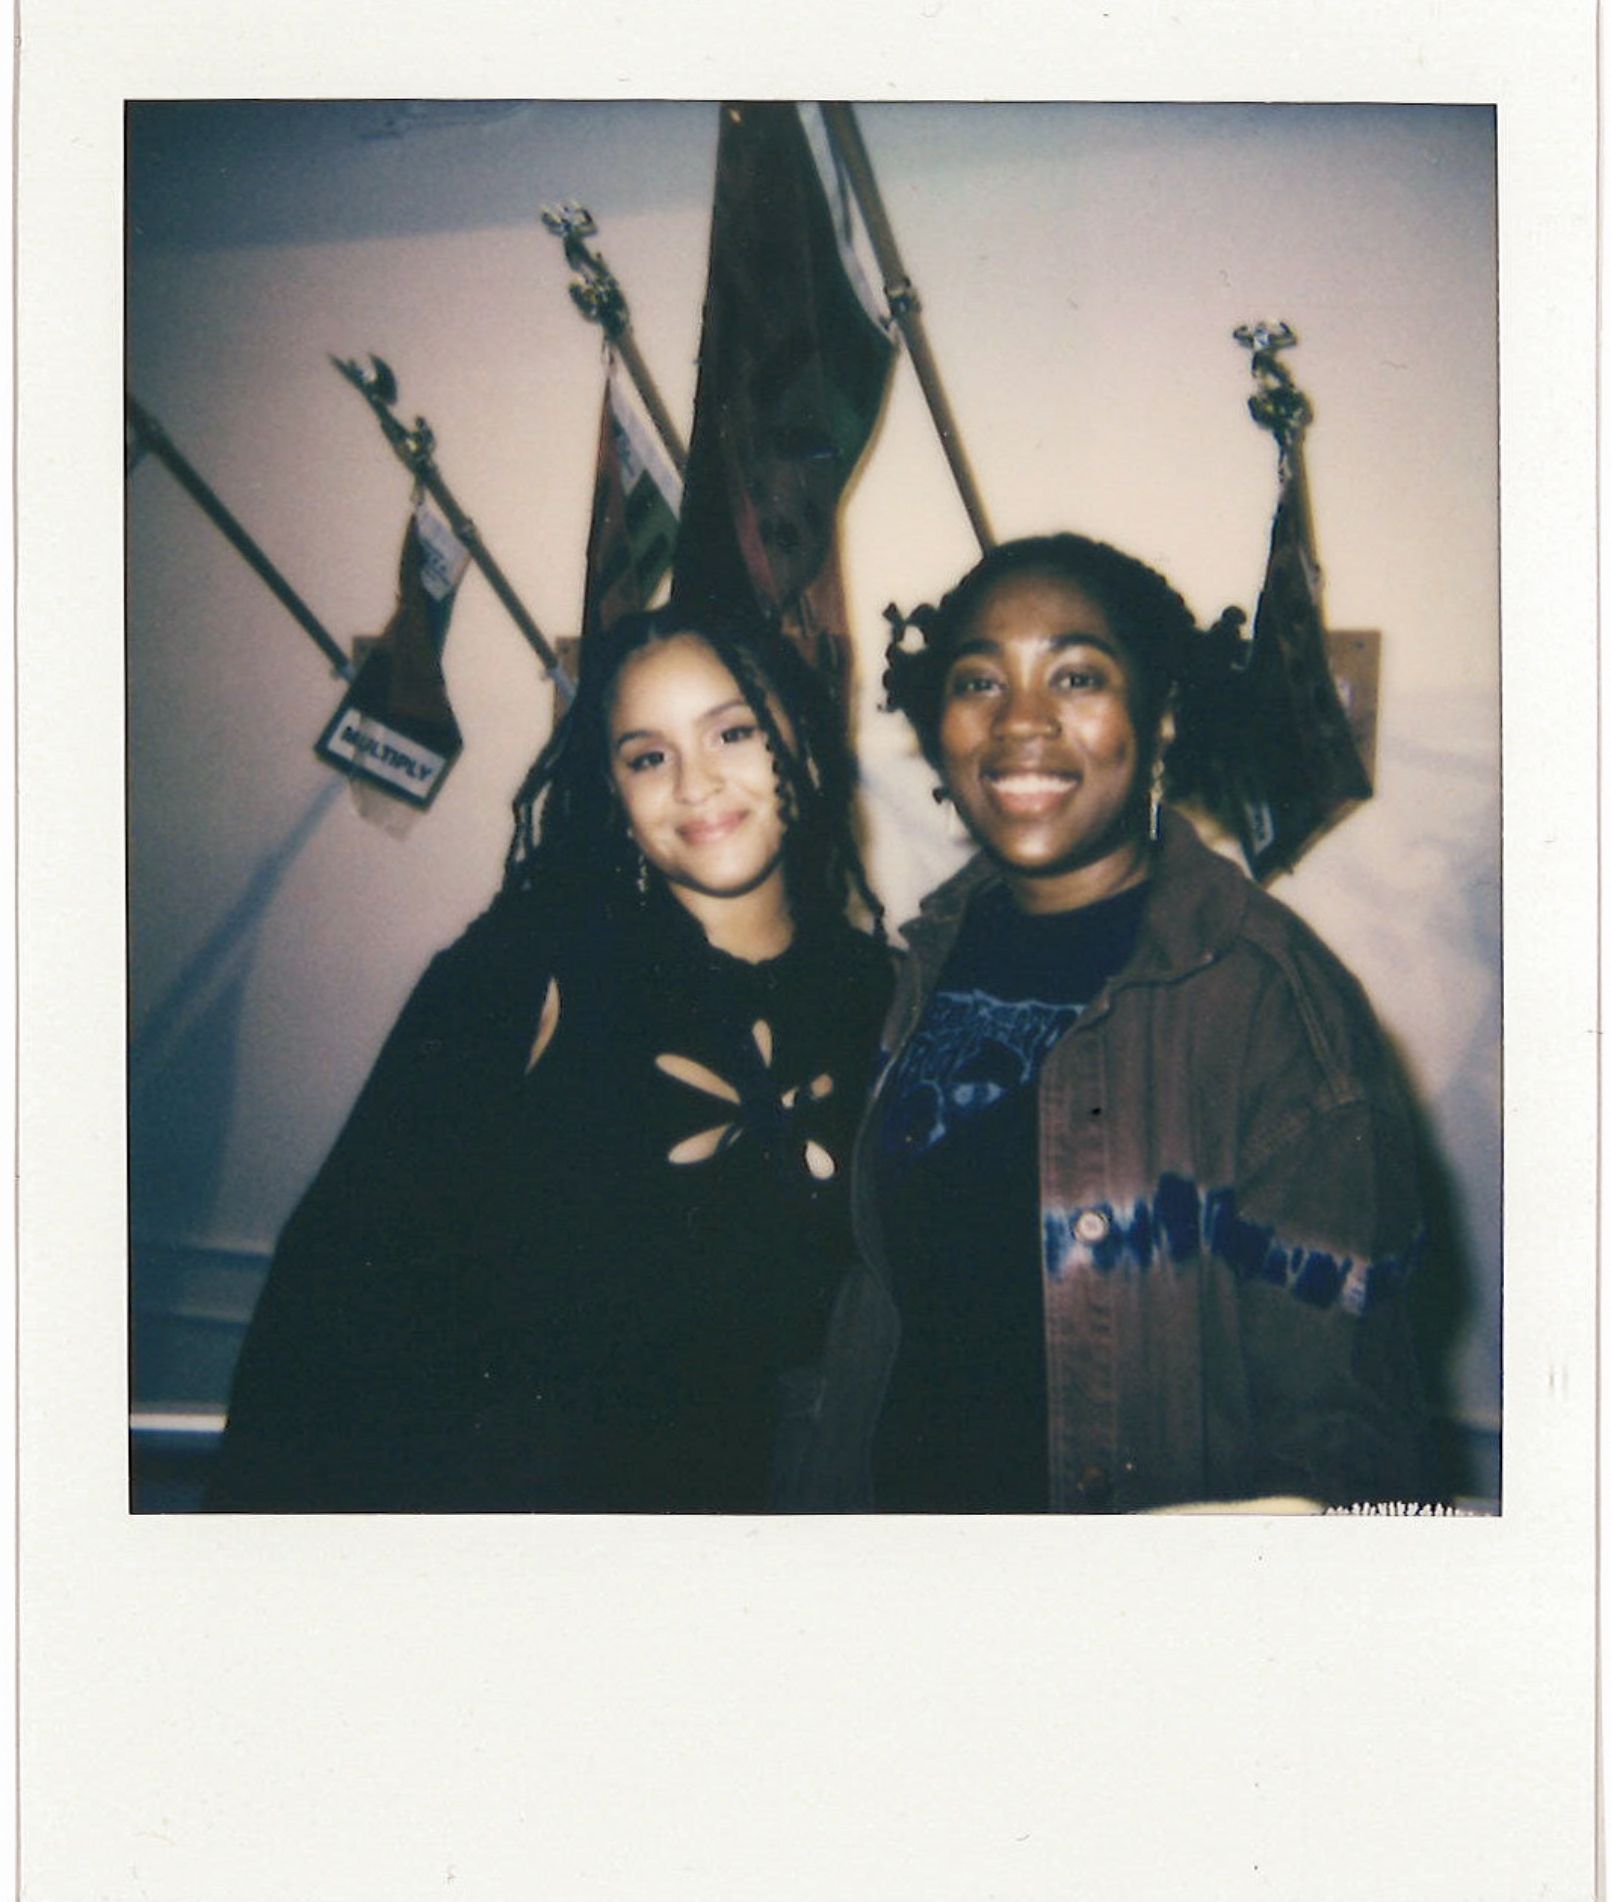 polaroid of two people smiling in front of art flags hanging on wall